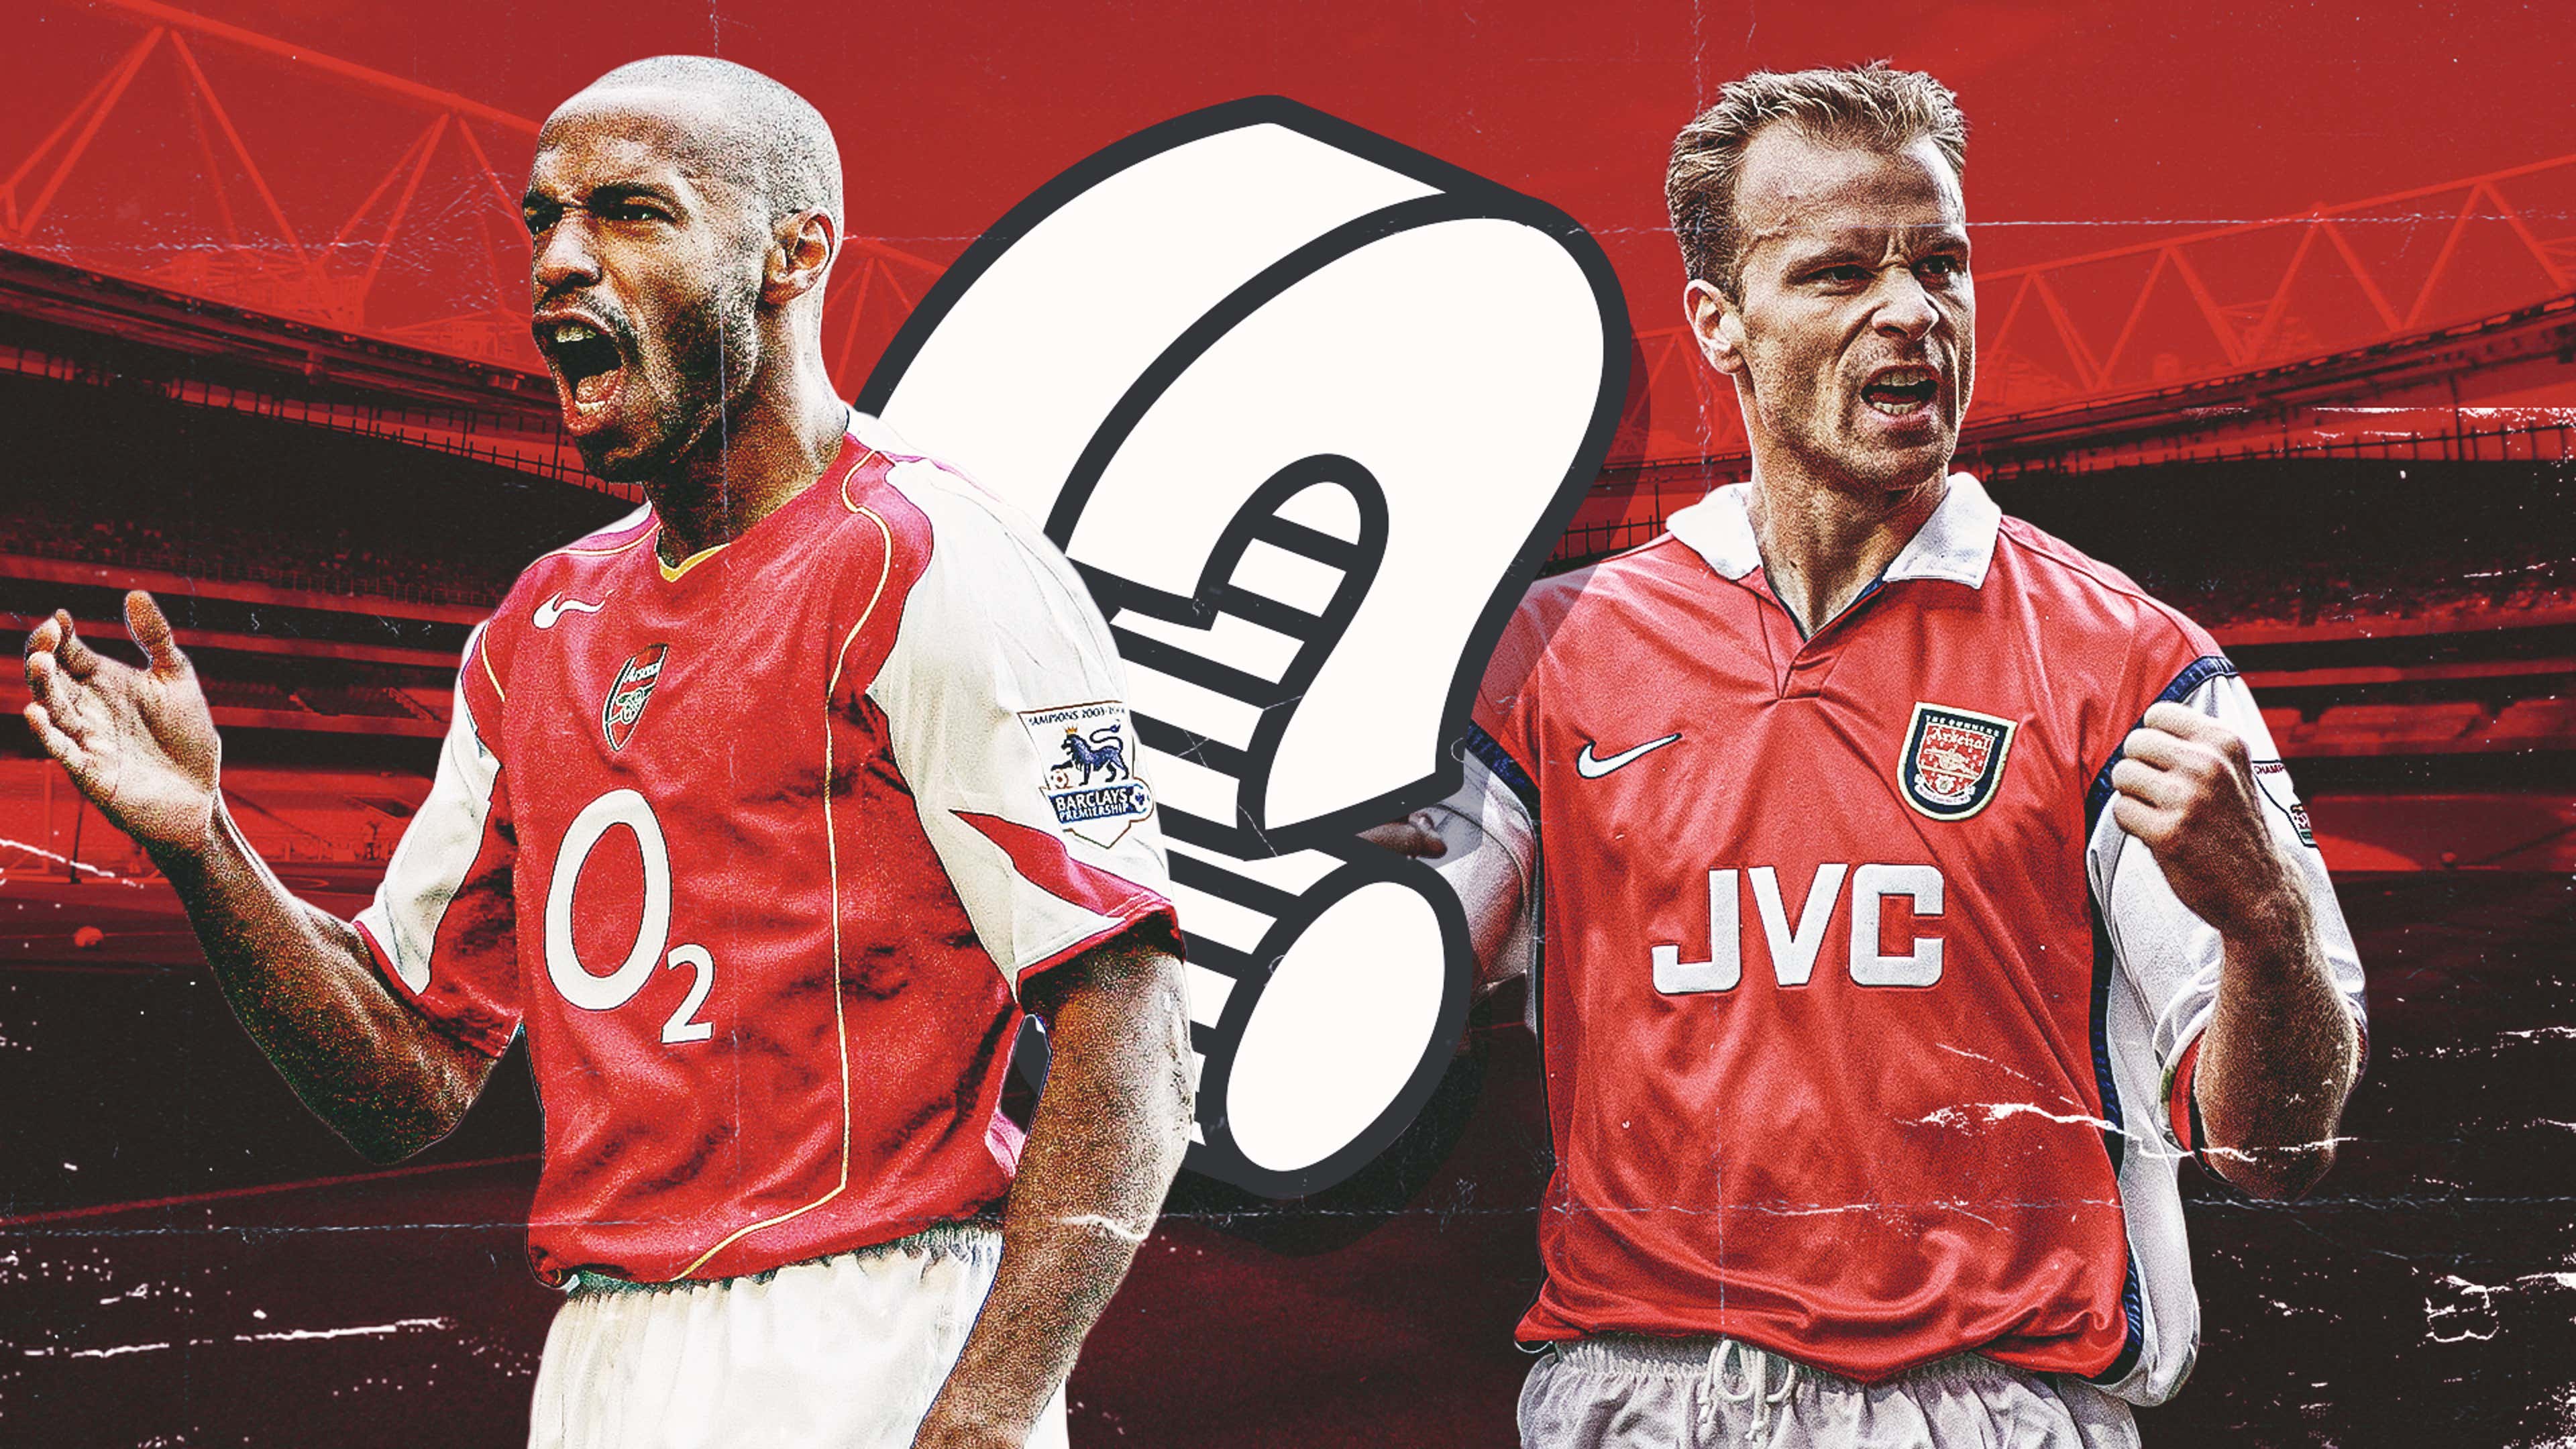 QUIZ: Name these Premier League legends from their transfer history 